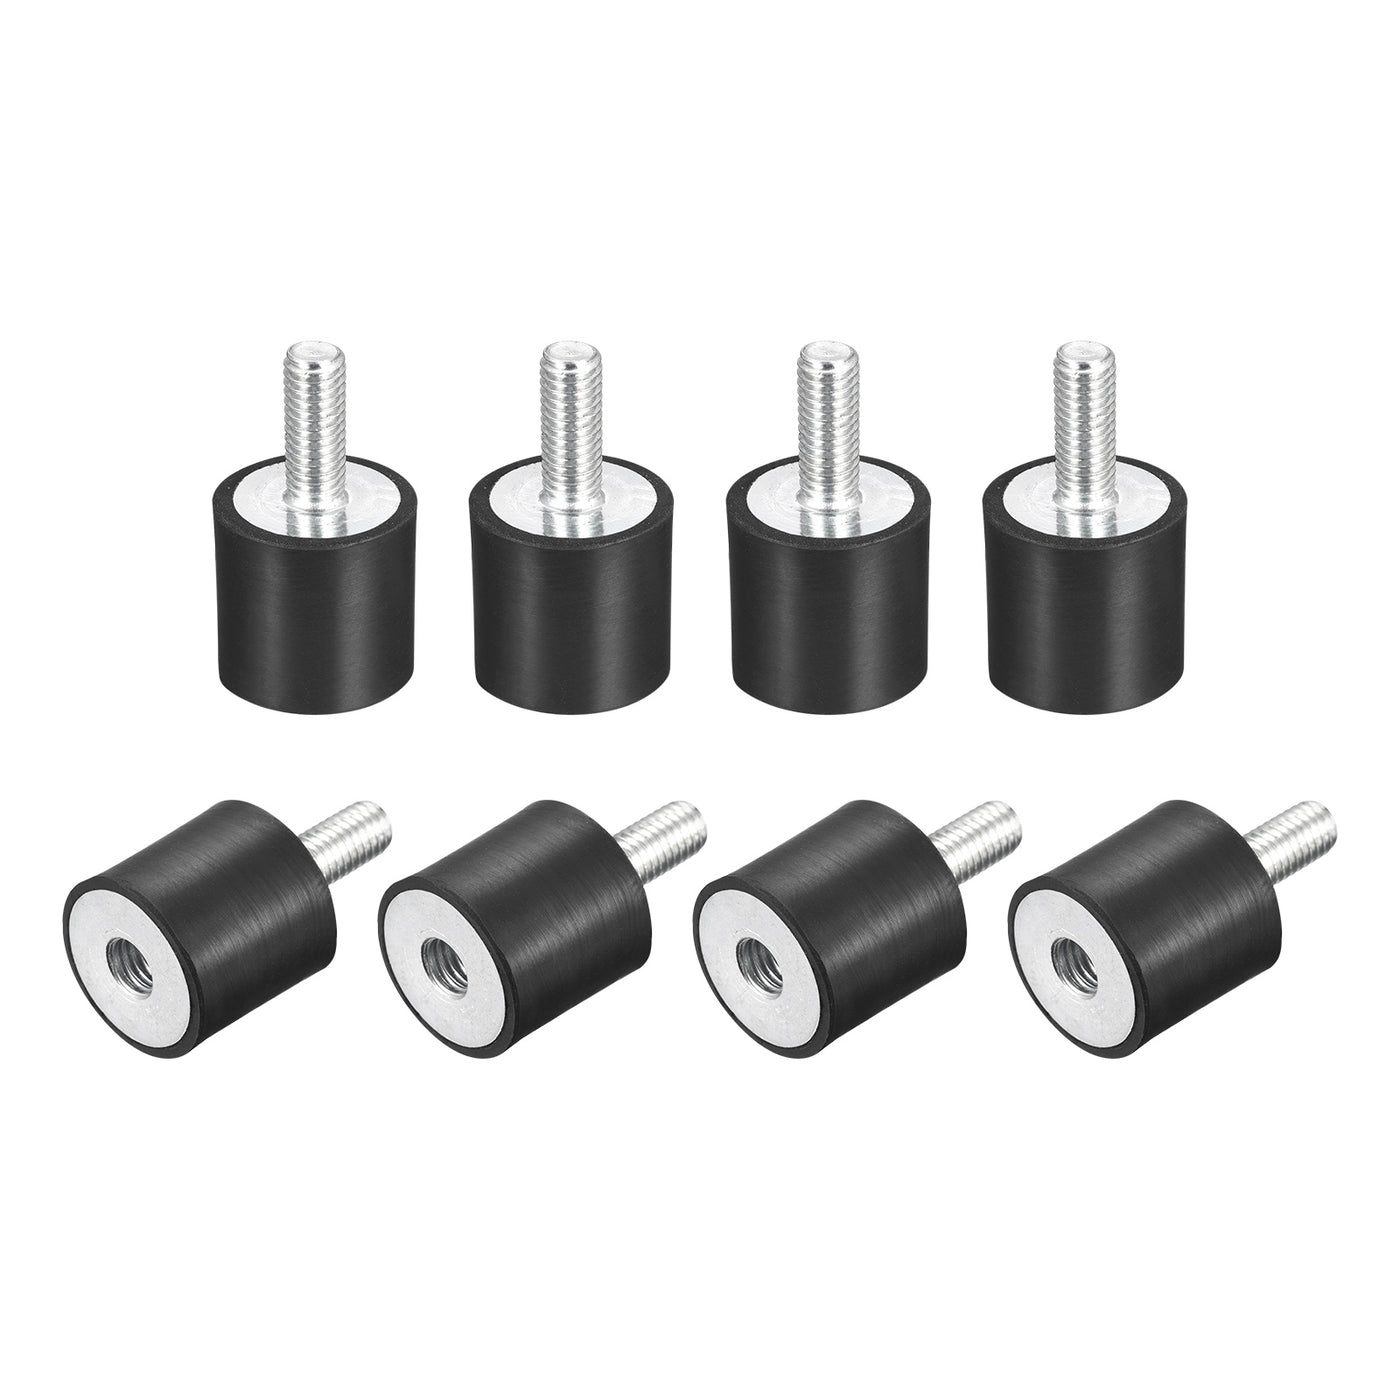 uxcell Uxcell Rubber Mount 10pcs M8 Male/Female Vibration Isolator Shock Absorber, D25mmxH25mm